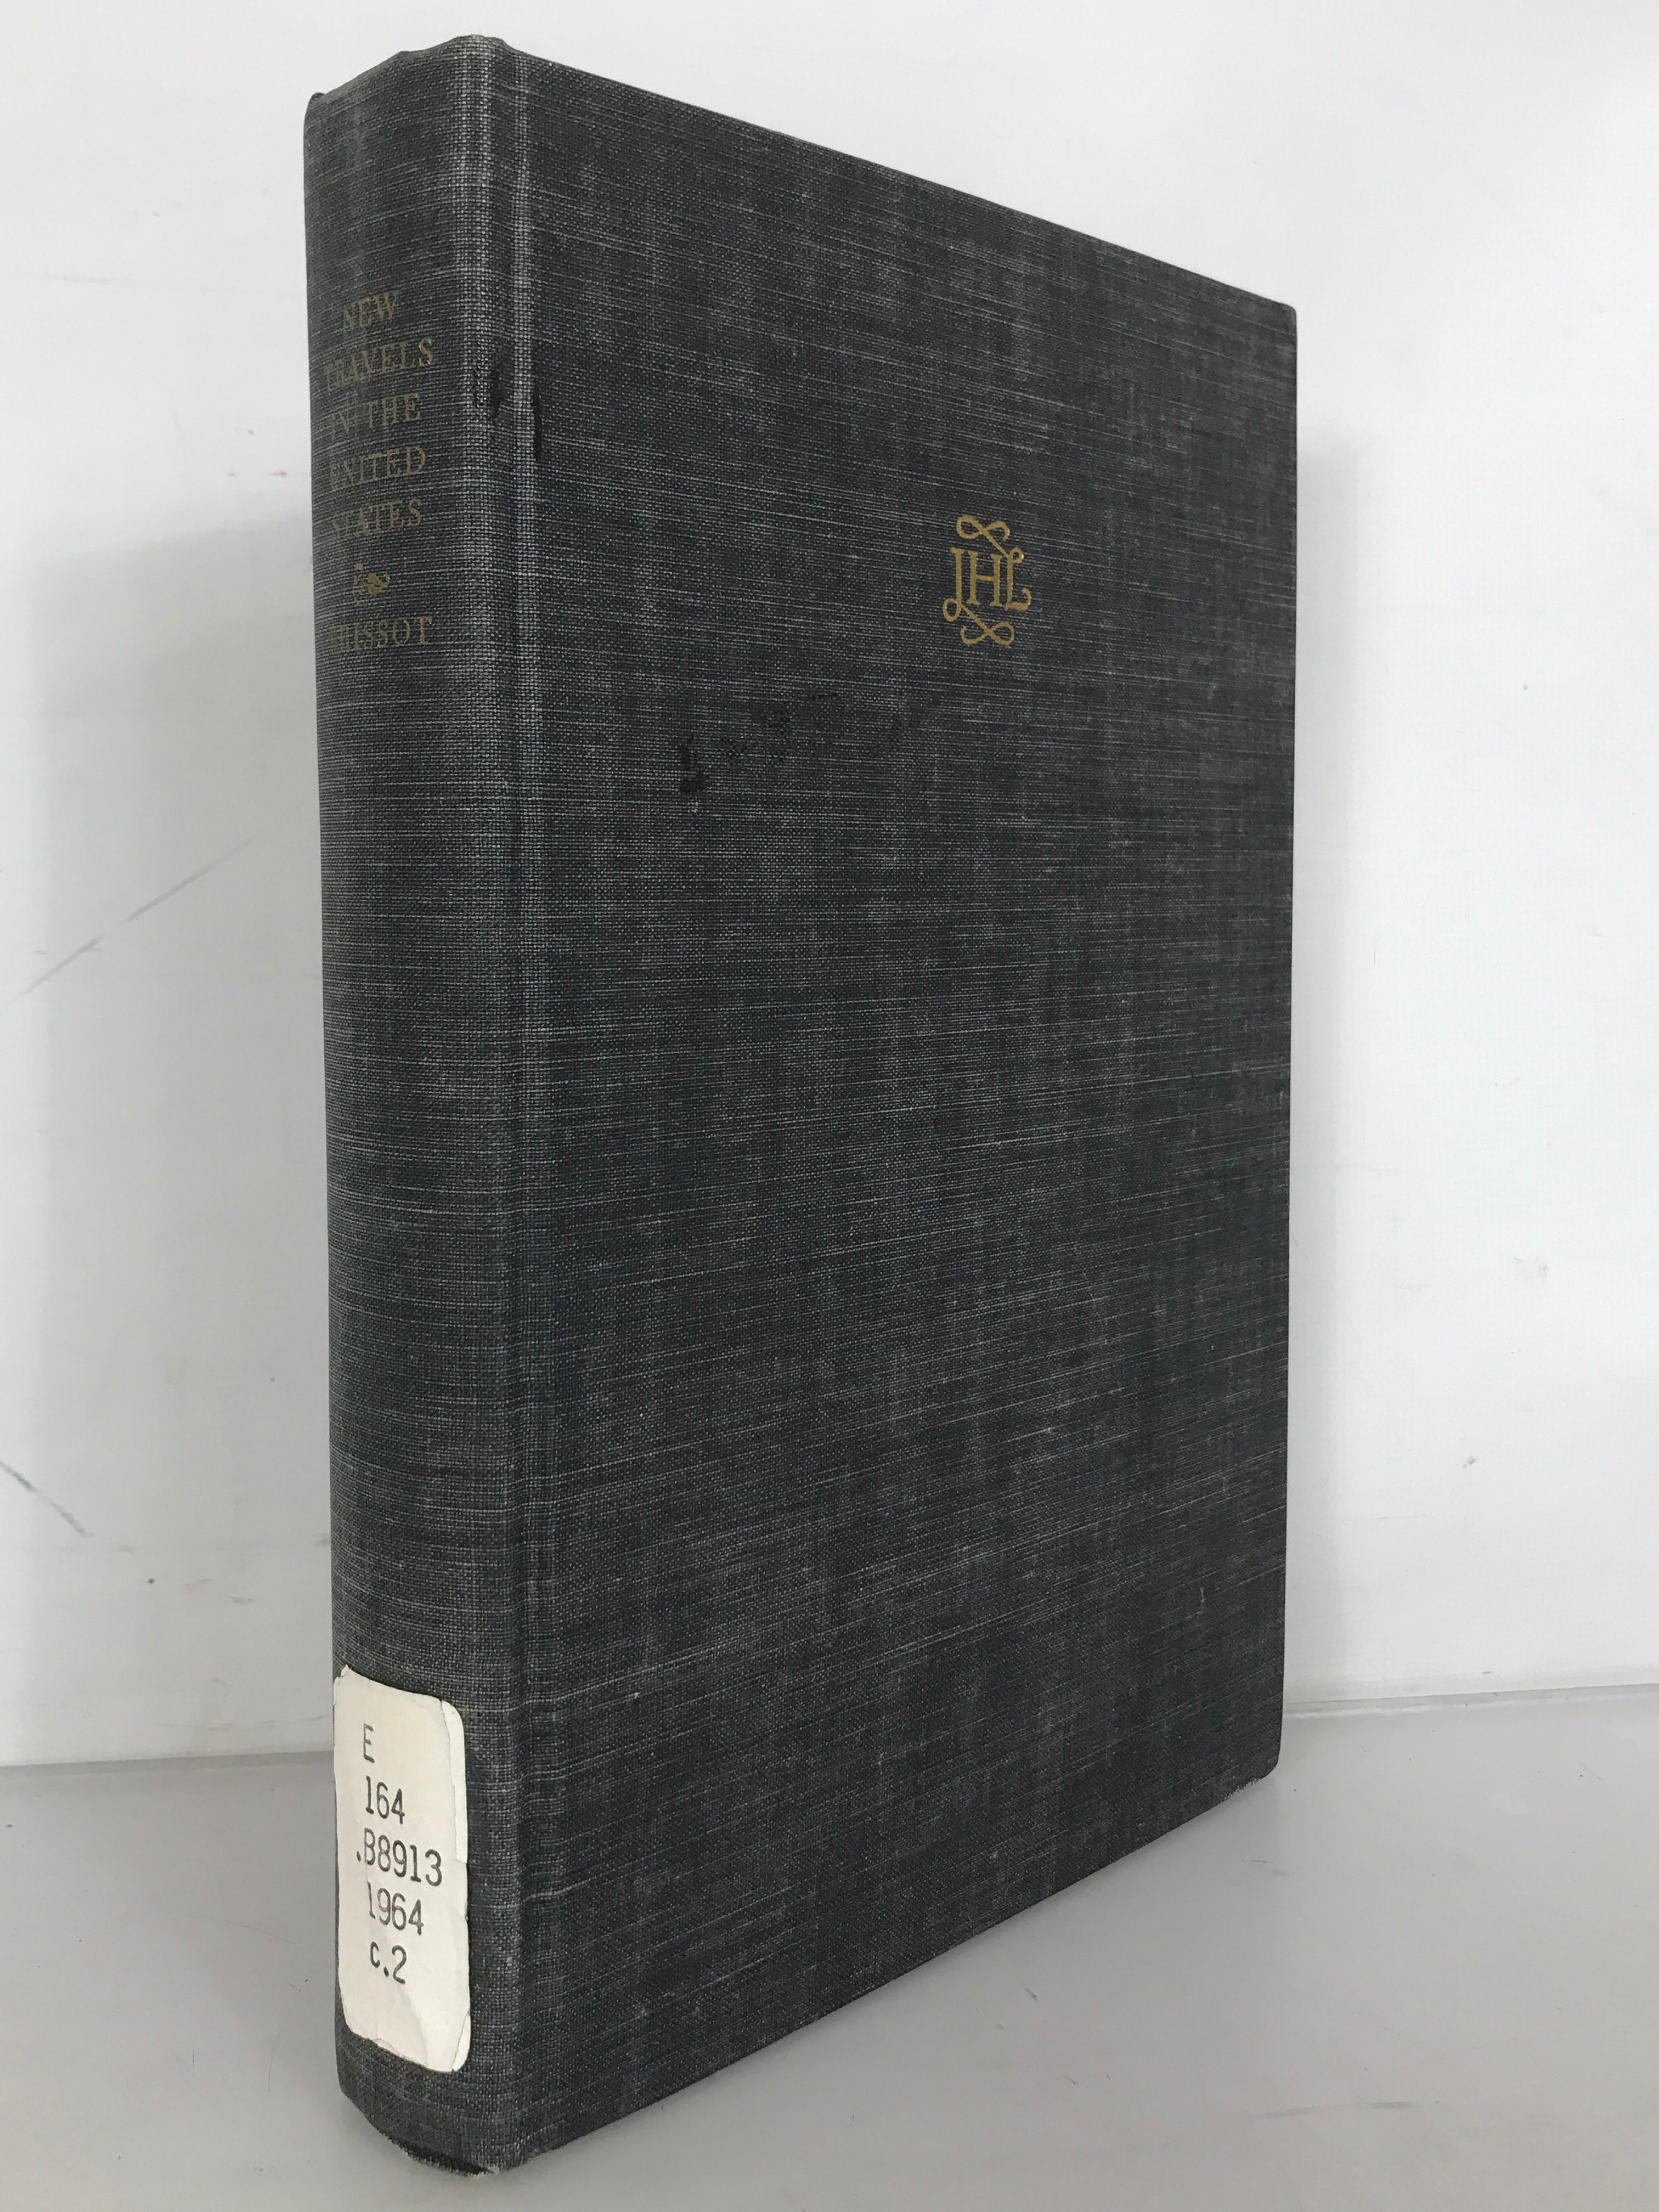 New Travels in the United States of America 1788 by De Warville The John Harvard Library 1964 HC